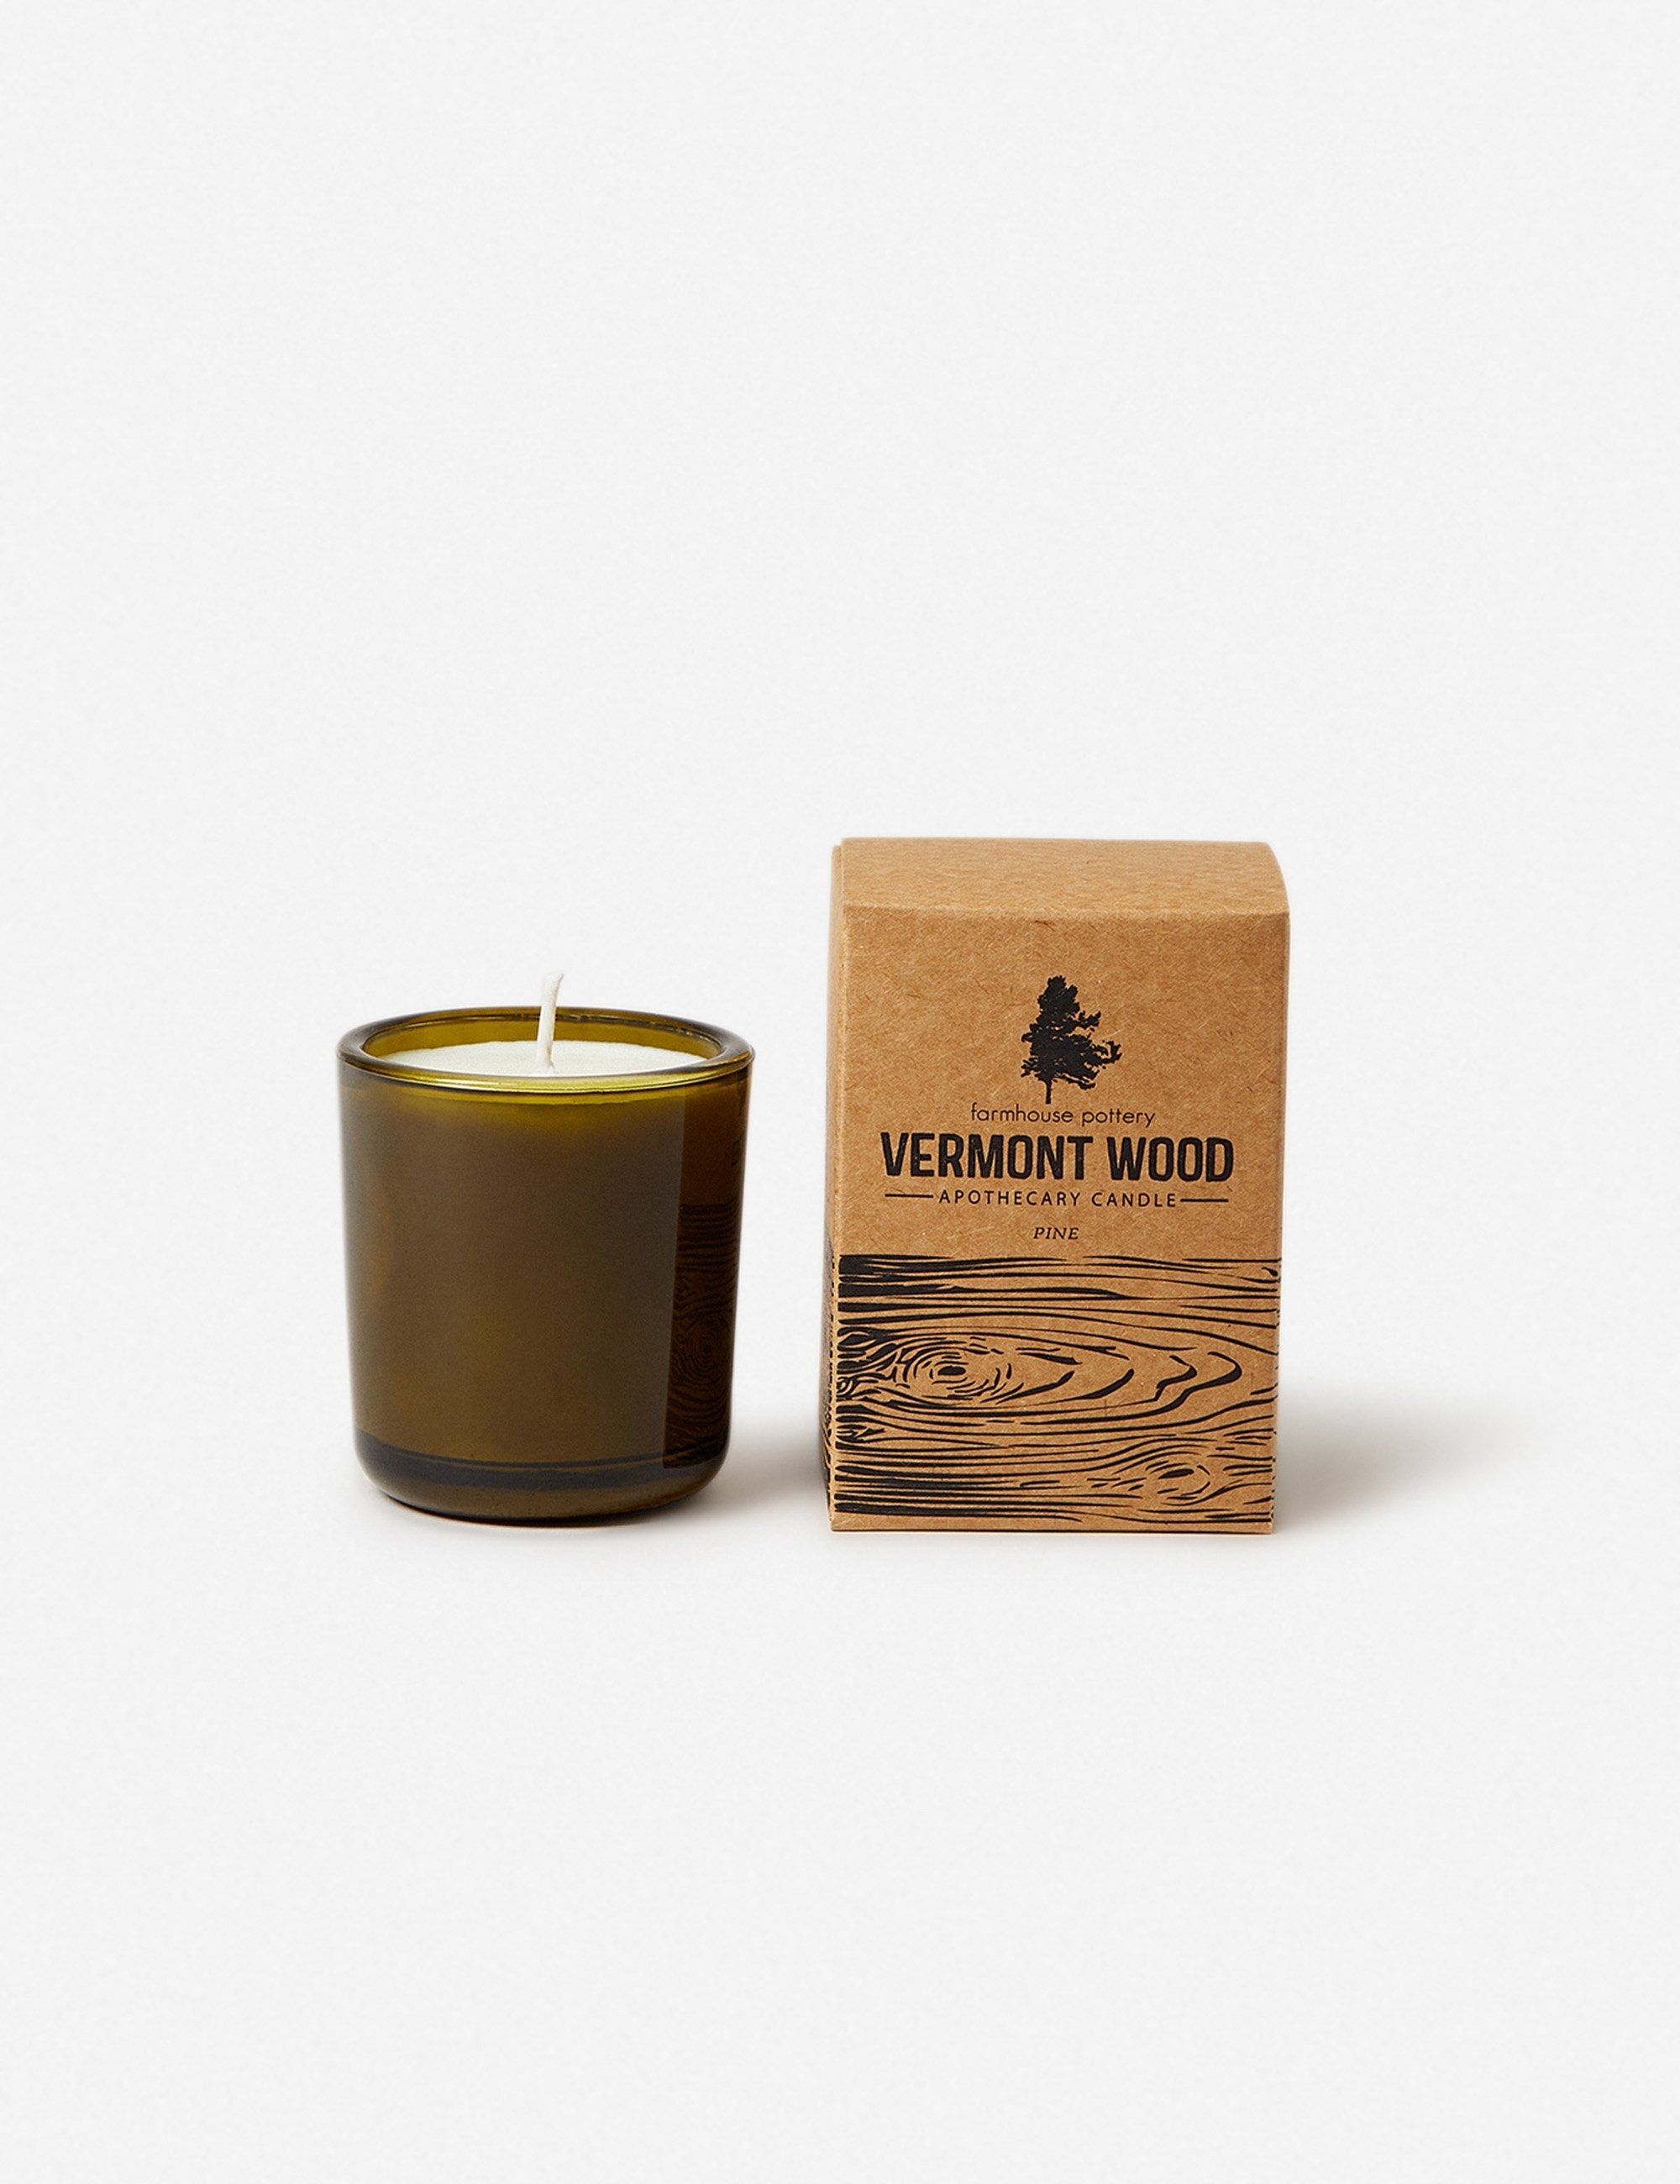 Farmhouse Pottery Vermont Wood Pine Candle - Image 0